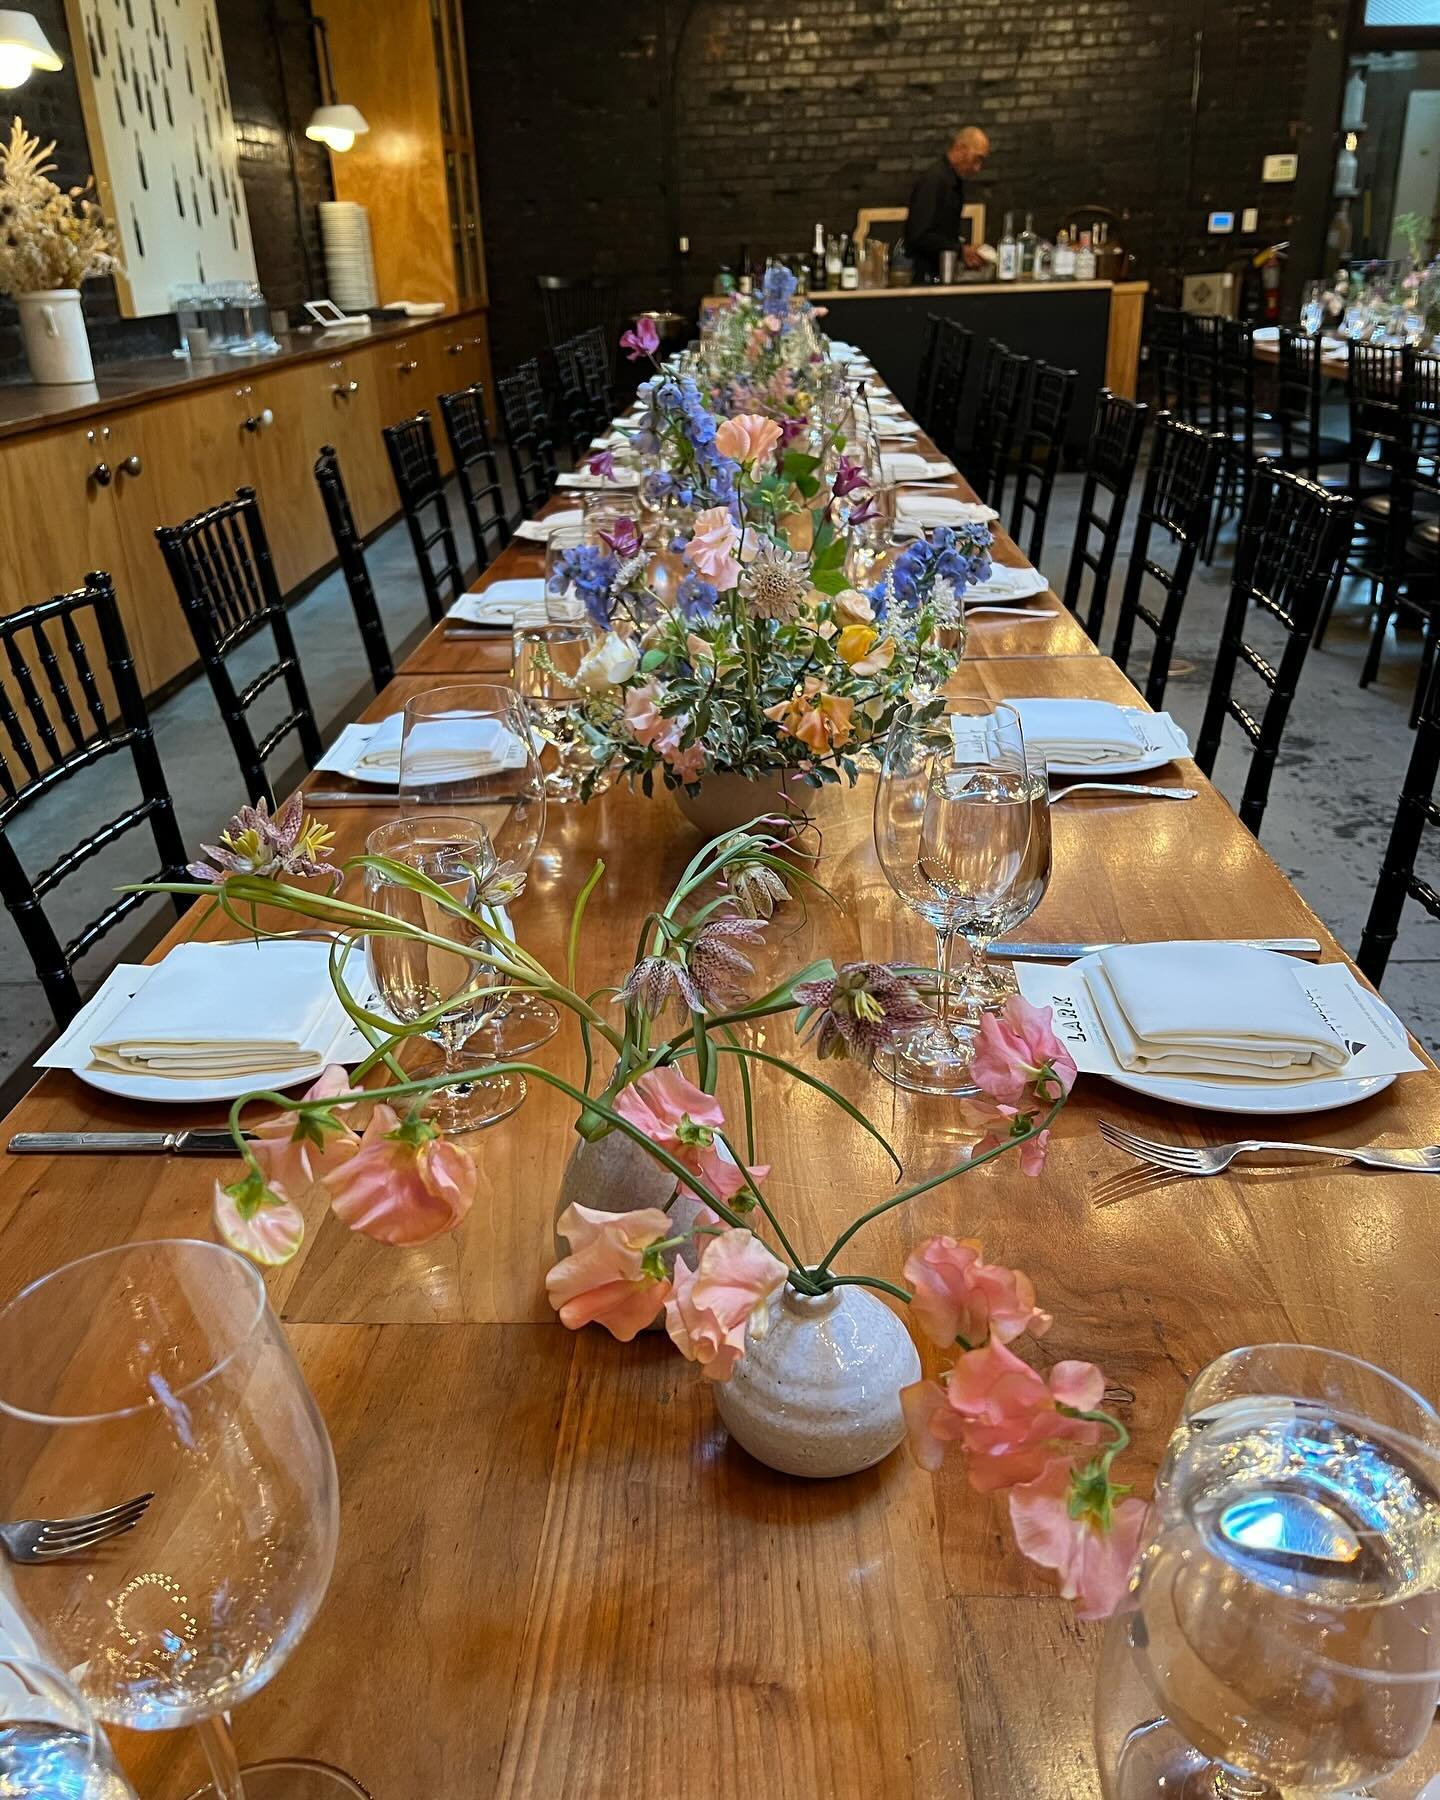 A celebration of Spring for the private room dinner parties. 
.
.
@thelarksb